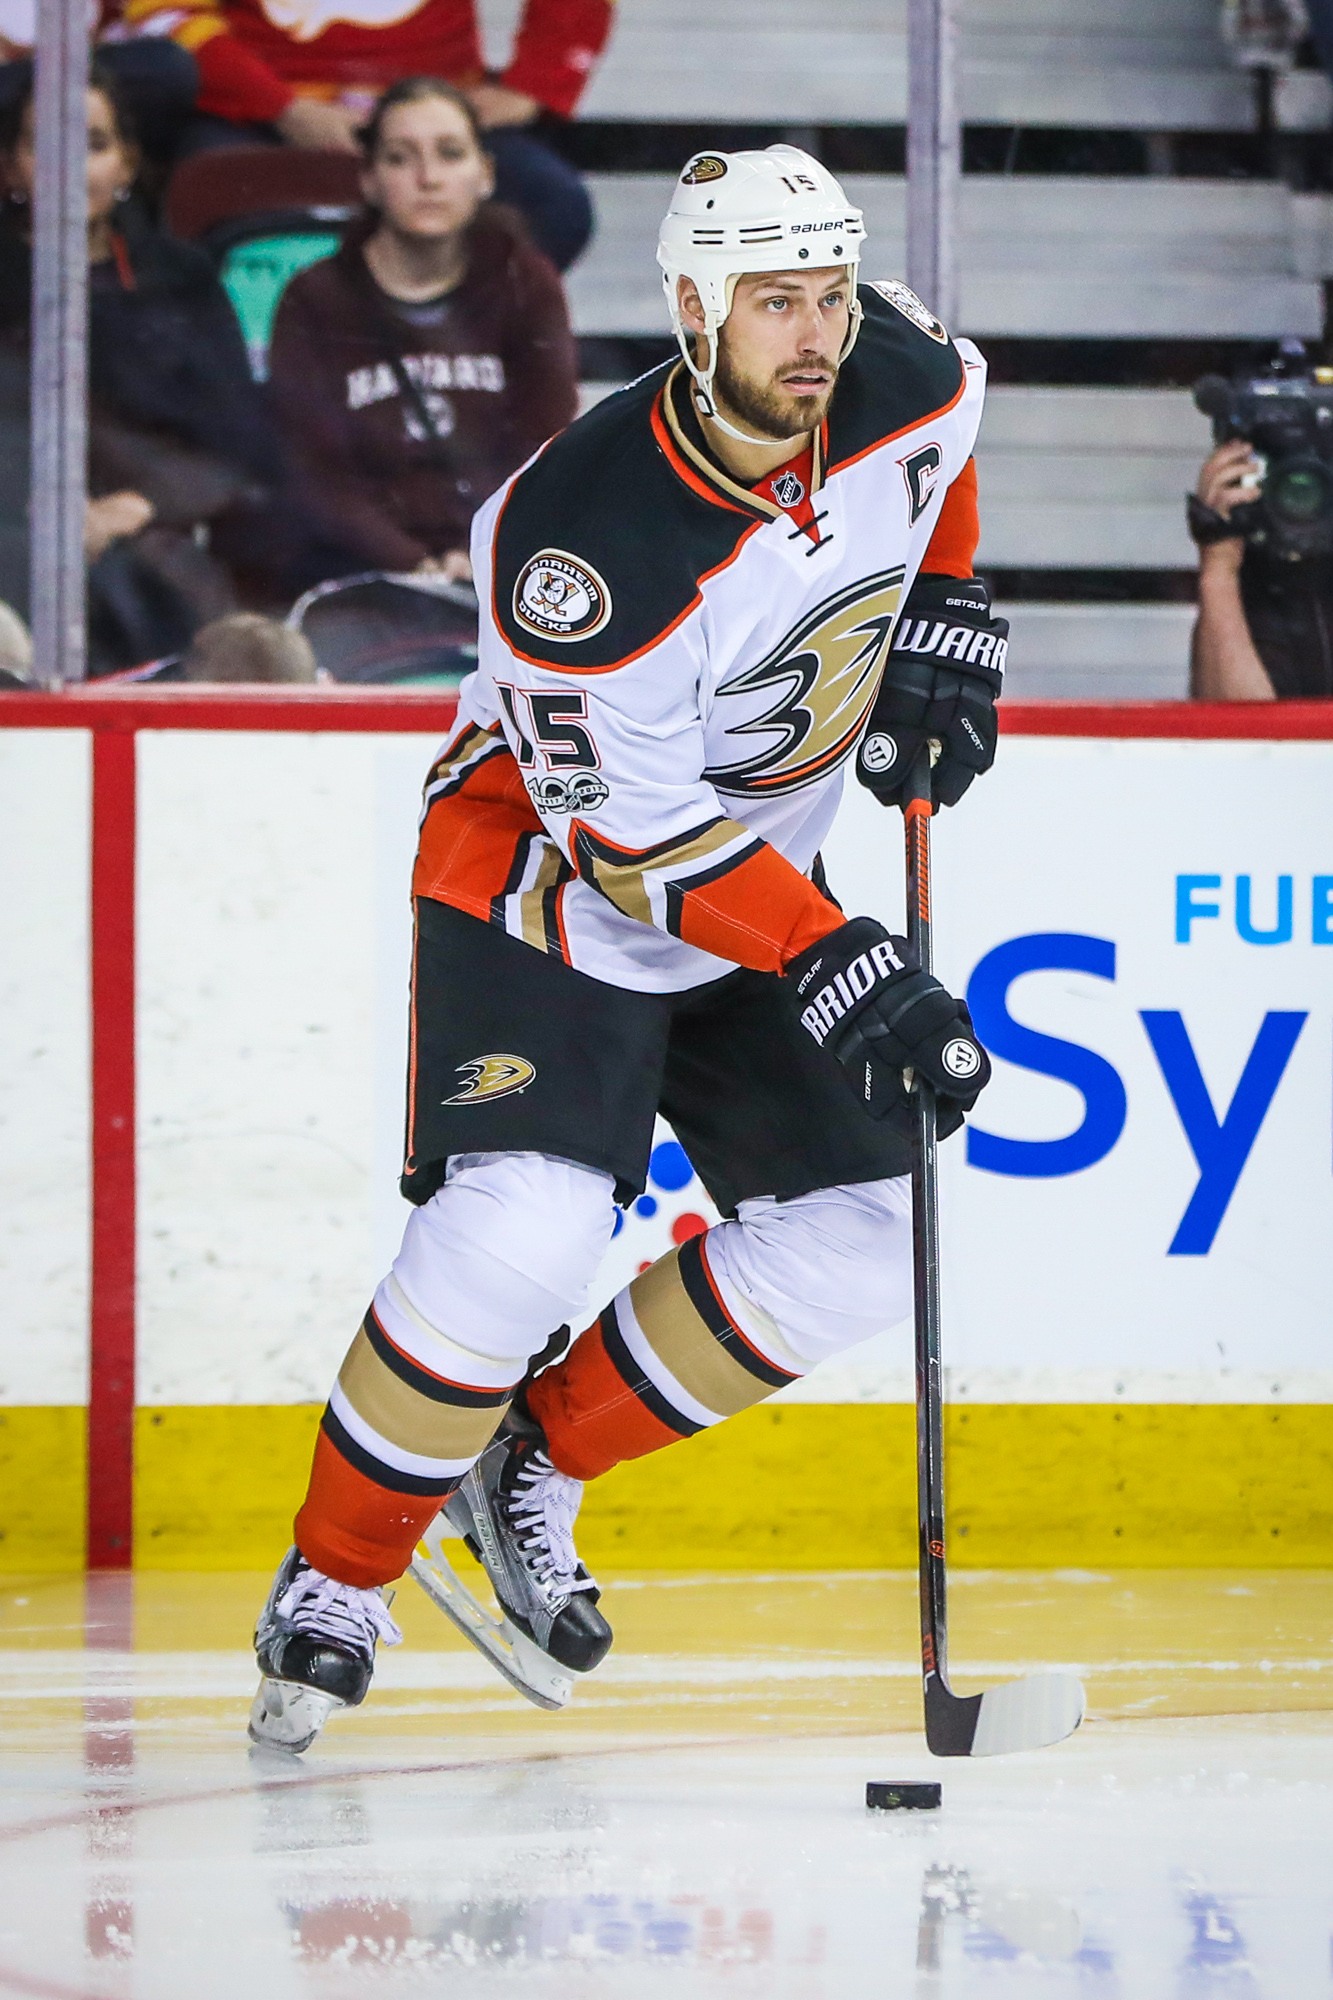 Ducks re-sign longtime captain Ryan Getzlaf to 1-year contract